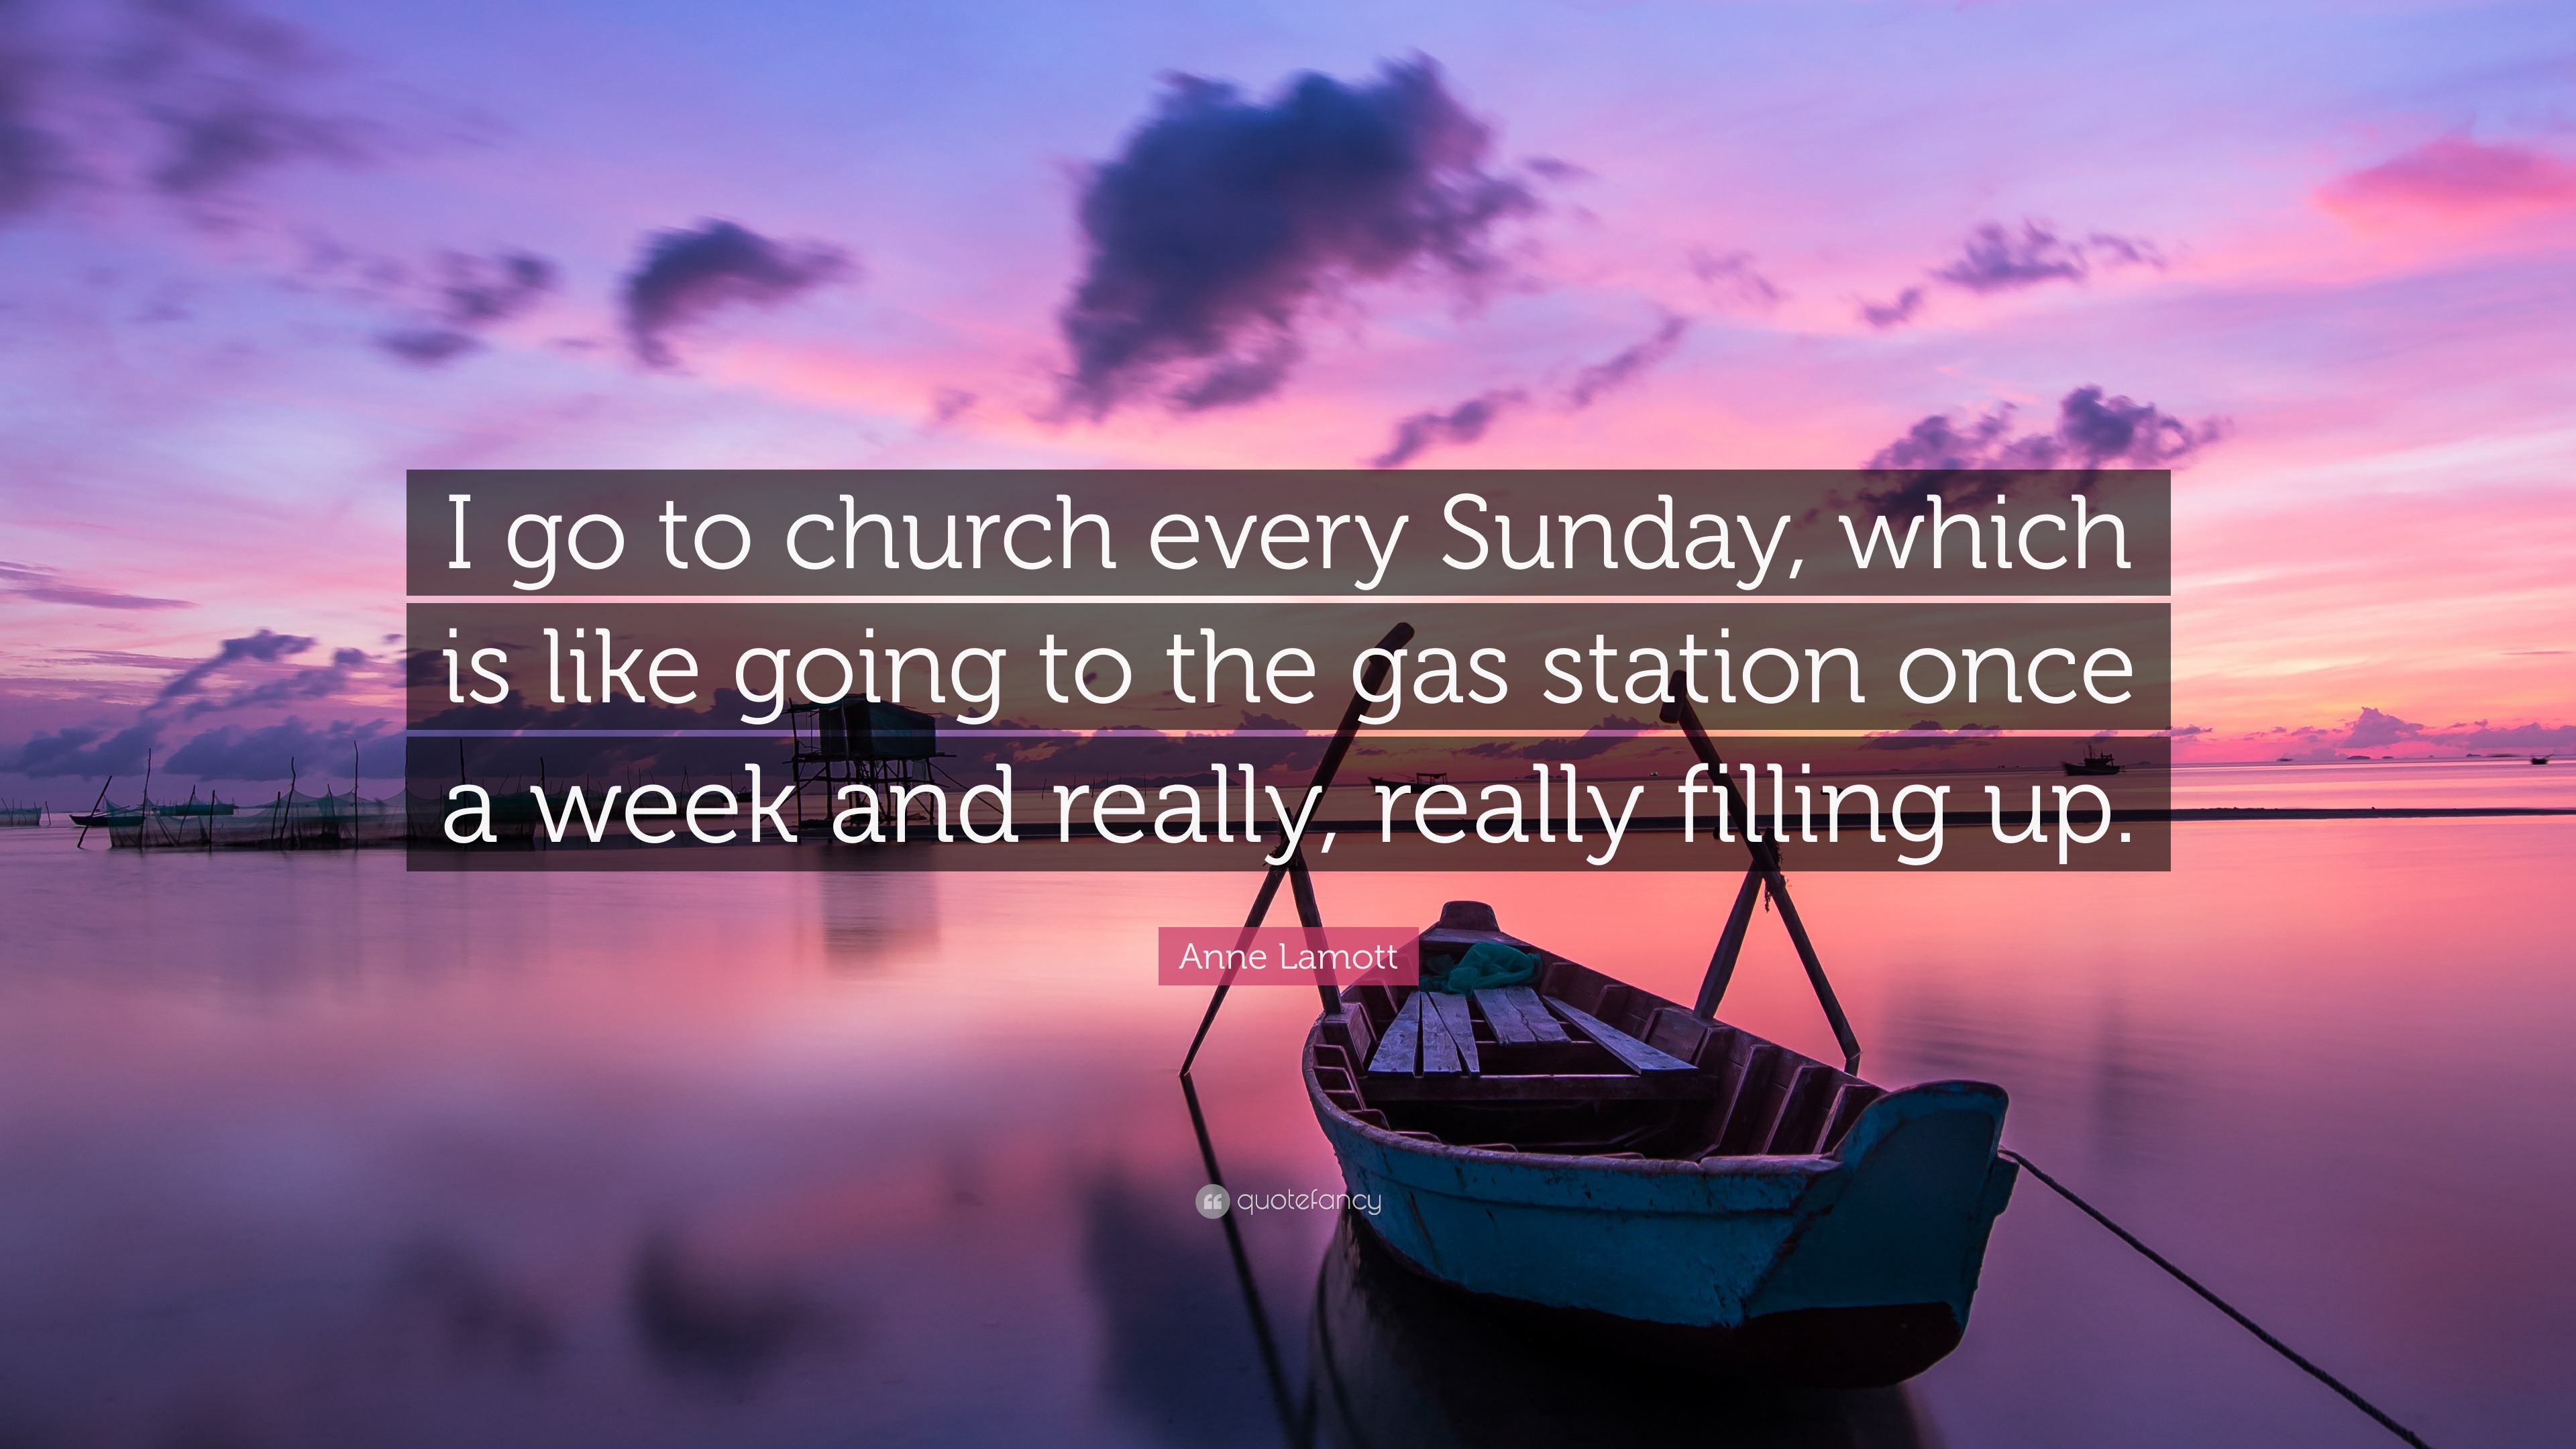 Anne Lamott Quote “i Go To Church Every Sunday Which Is Like Going To The Gas Station Once A